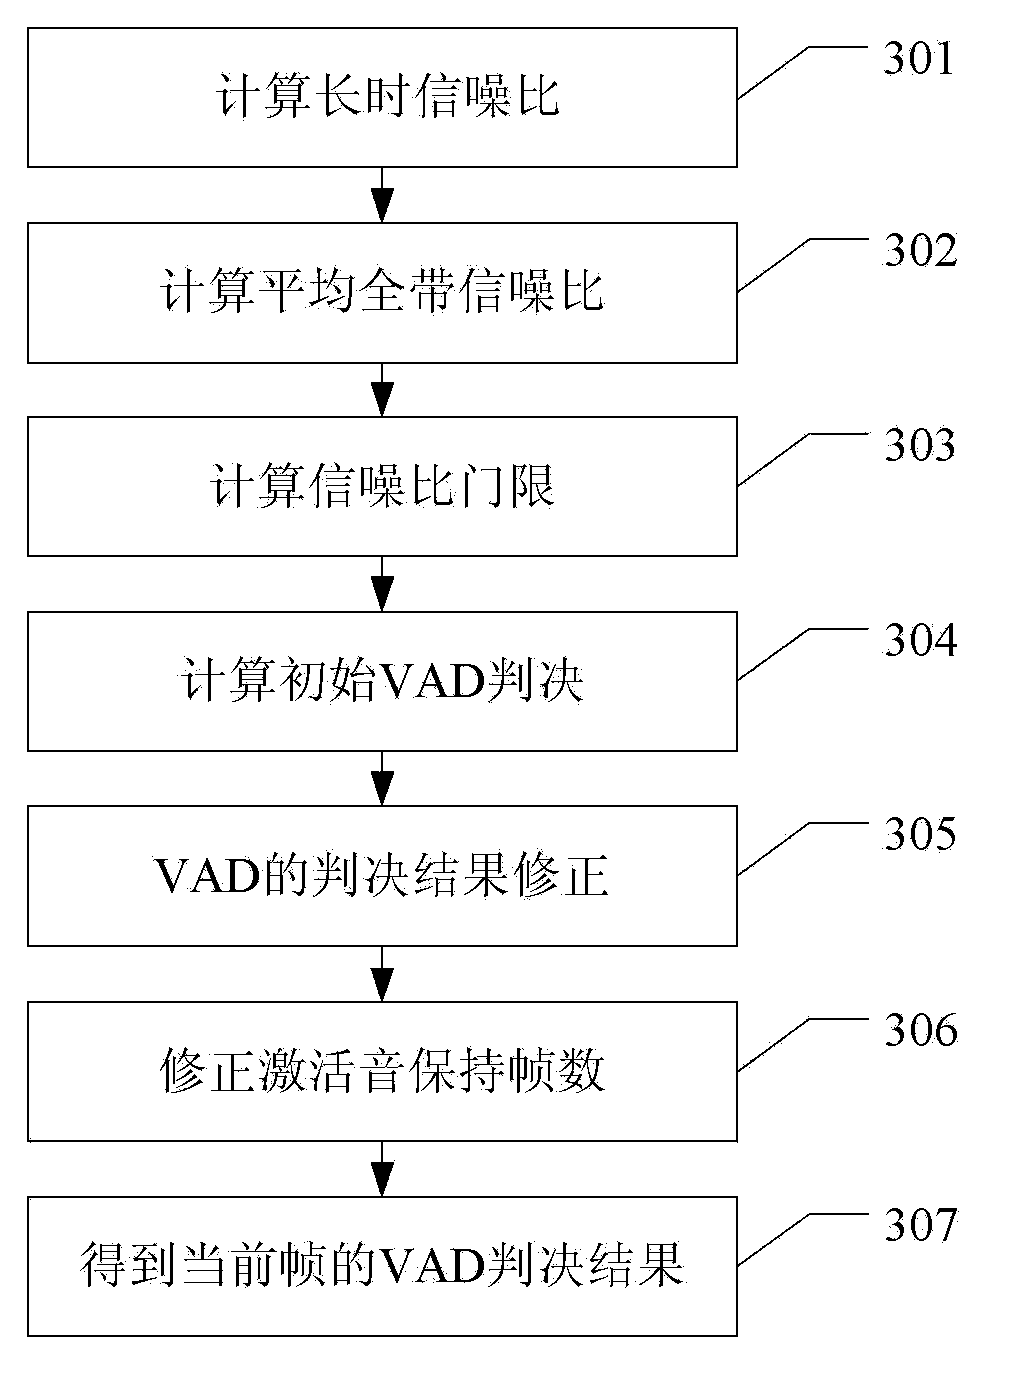 Voice activation detection (VAD), and method and apparatus for the VAD